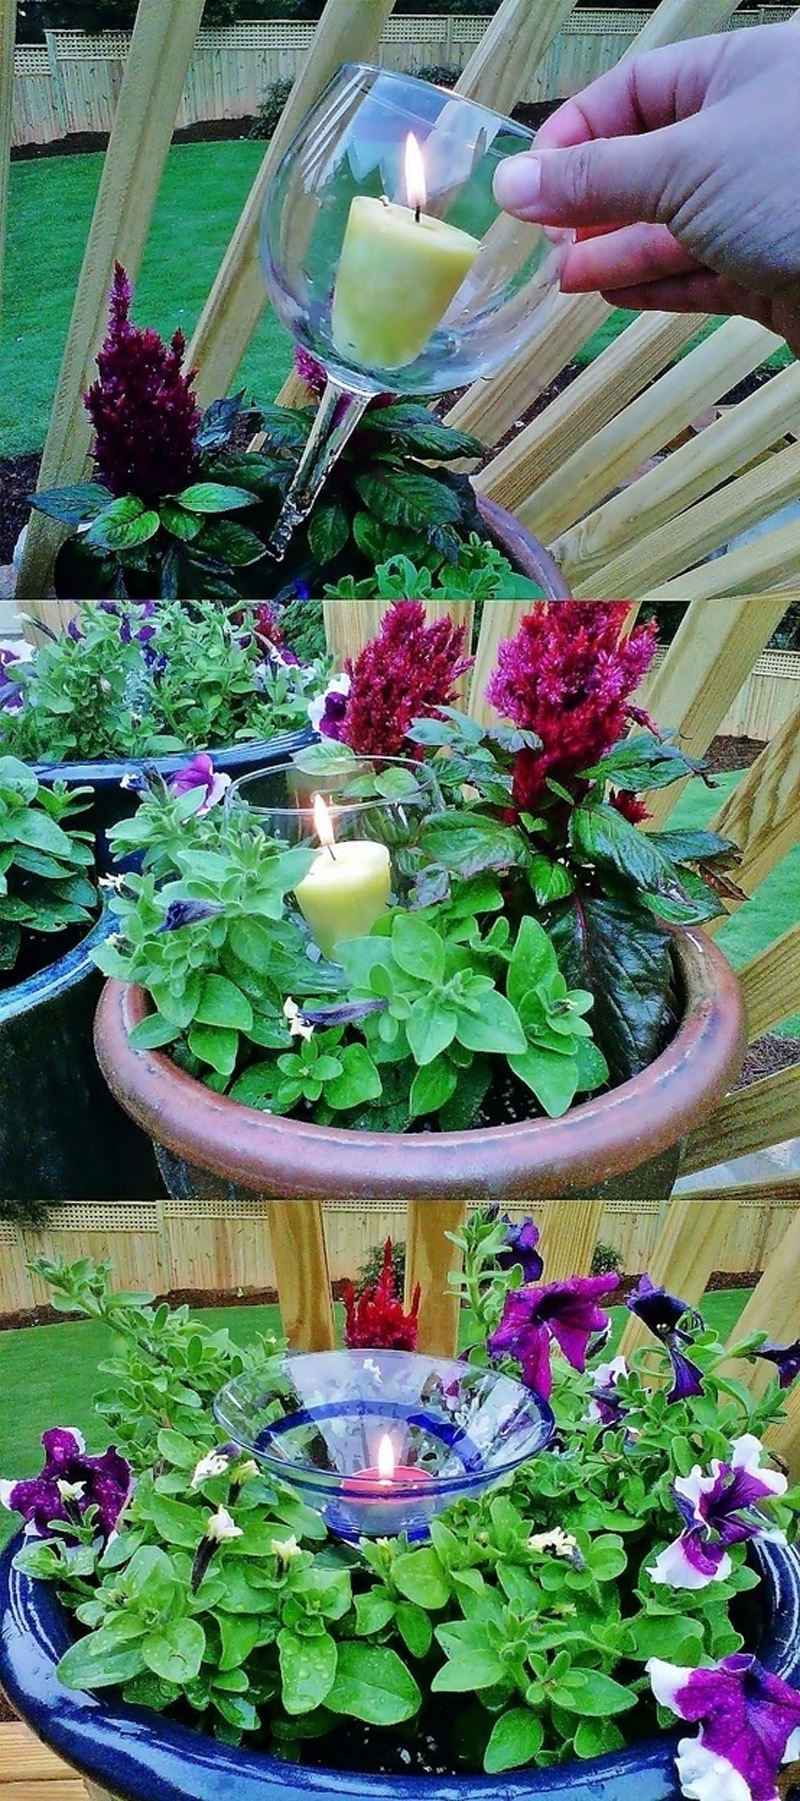 40 Creative DIY Gardening Ideas With Recycled Items | Architecture & Design